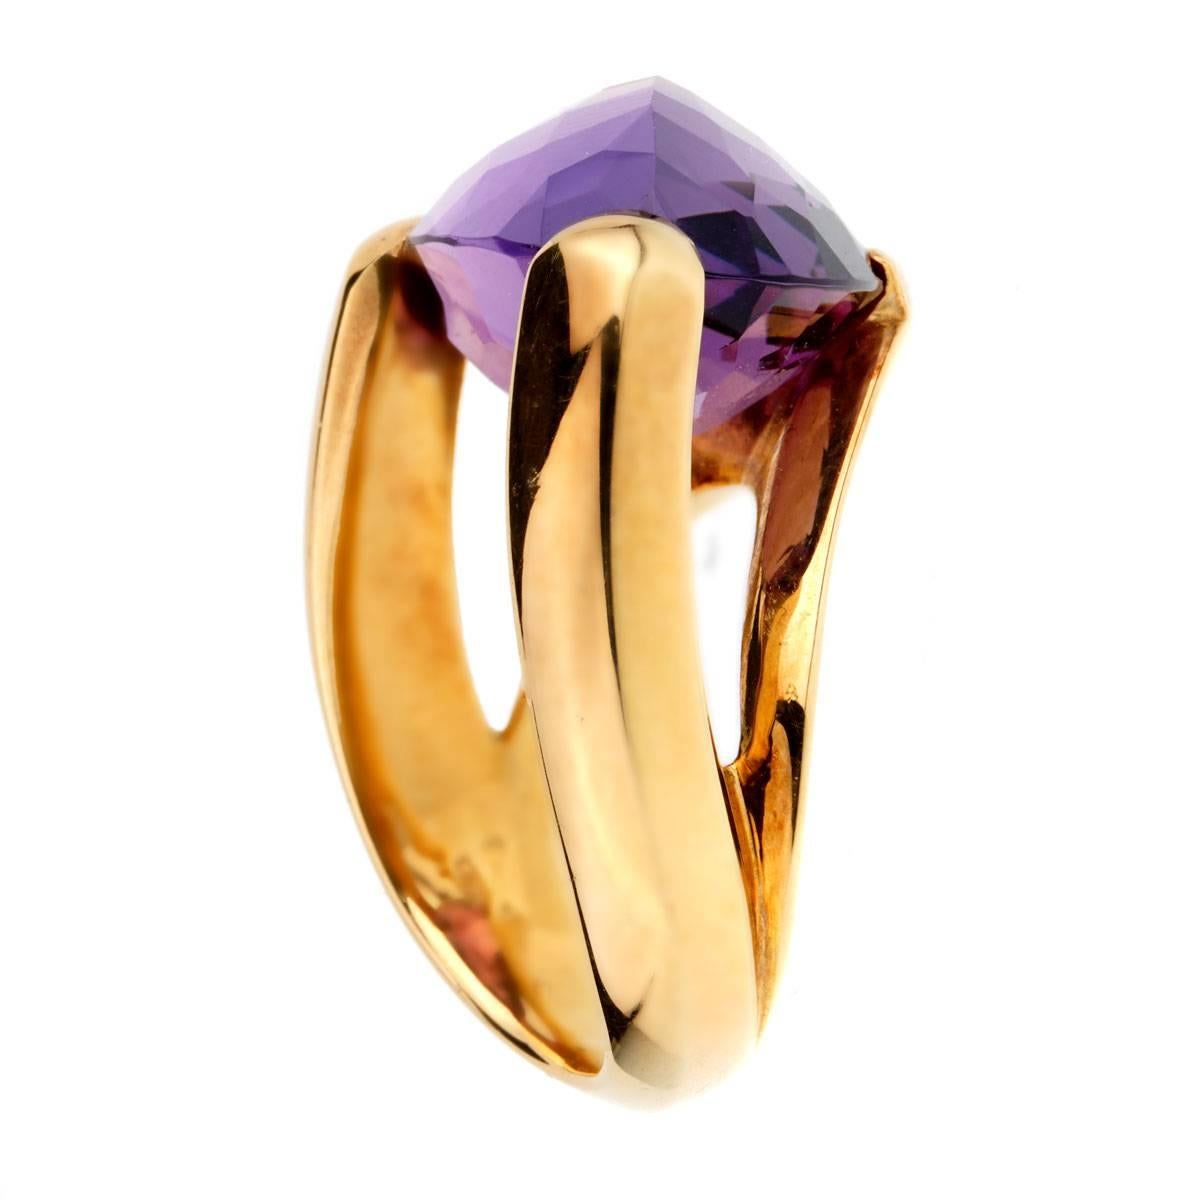 A stunning Antonini ring featuring a checkered cut Amethyst held by 3 prongs in 18k yellow gold. The ring measures a size 6 1/2 and can be resized.